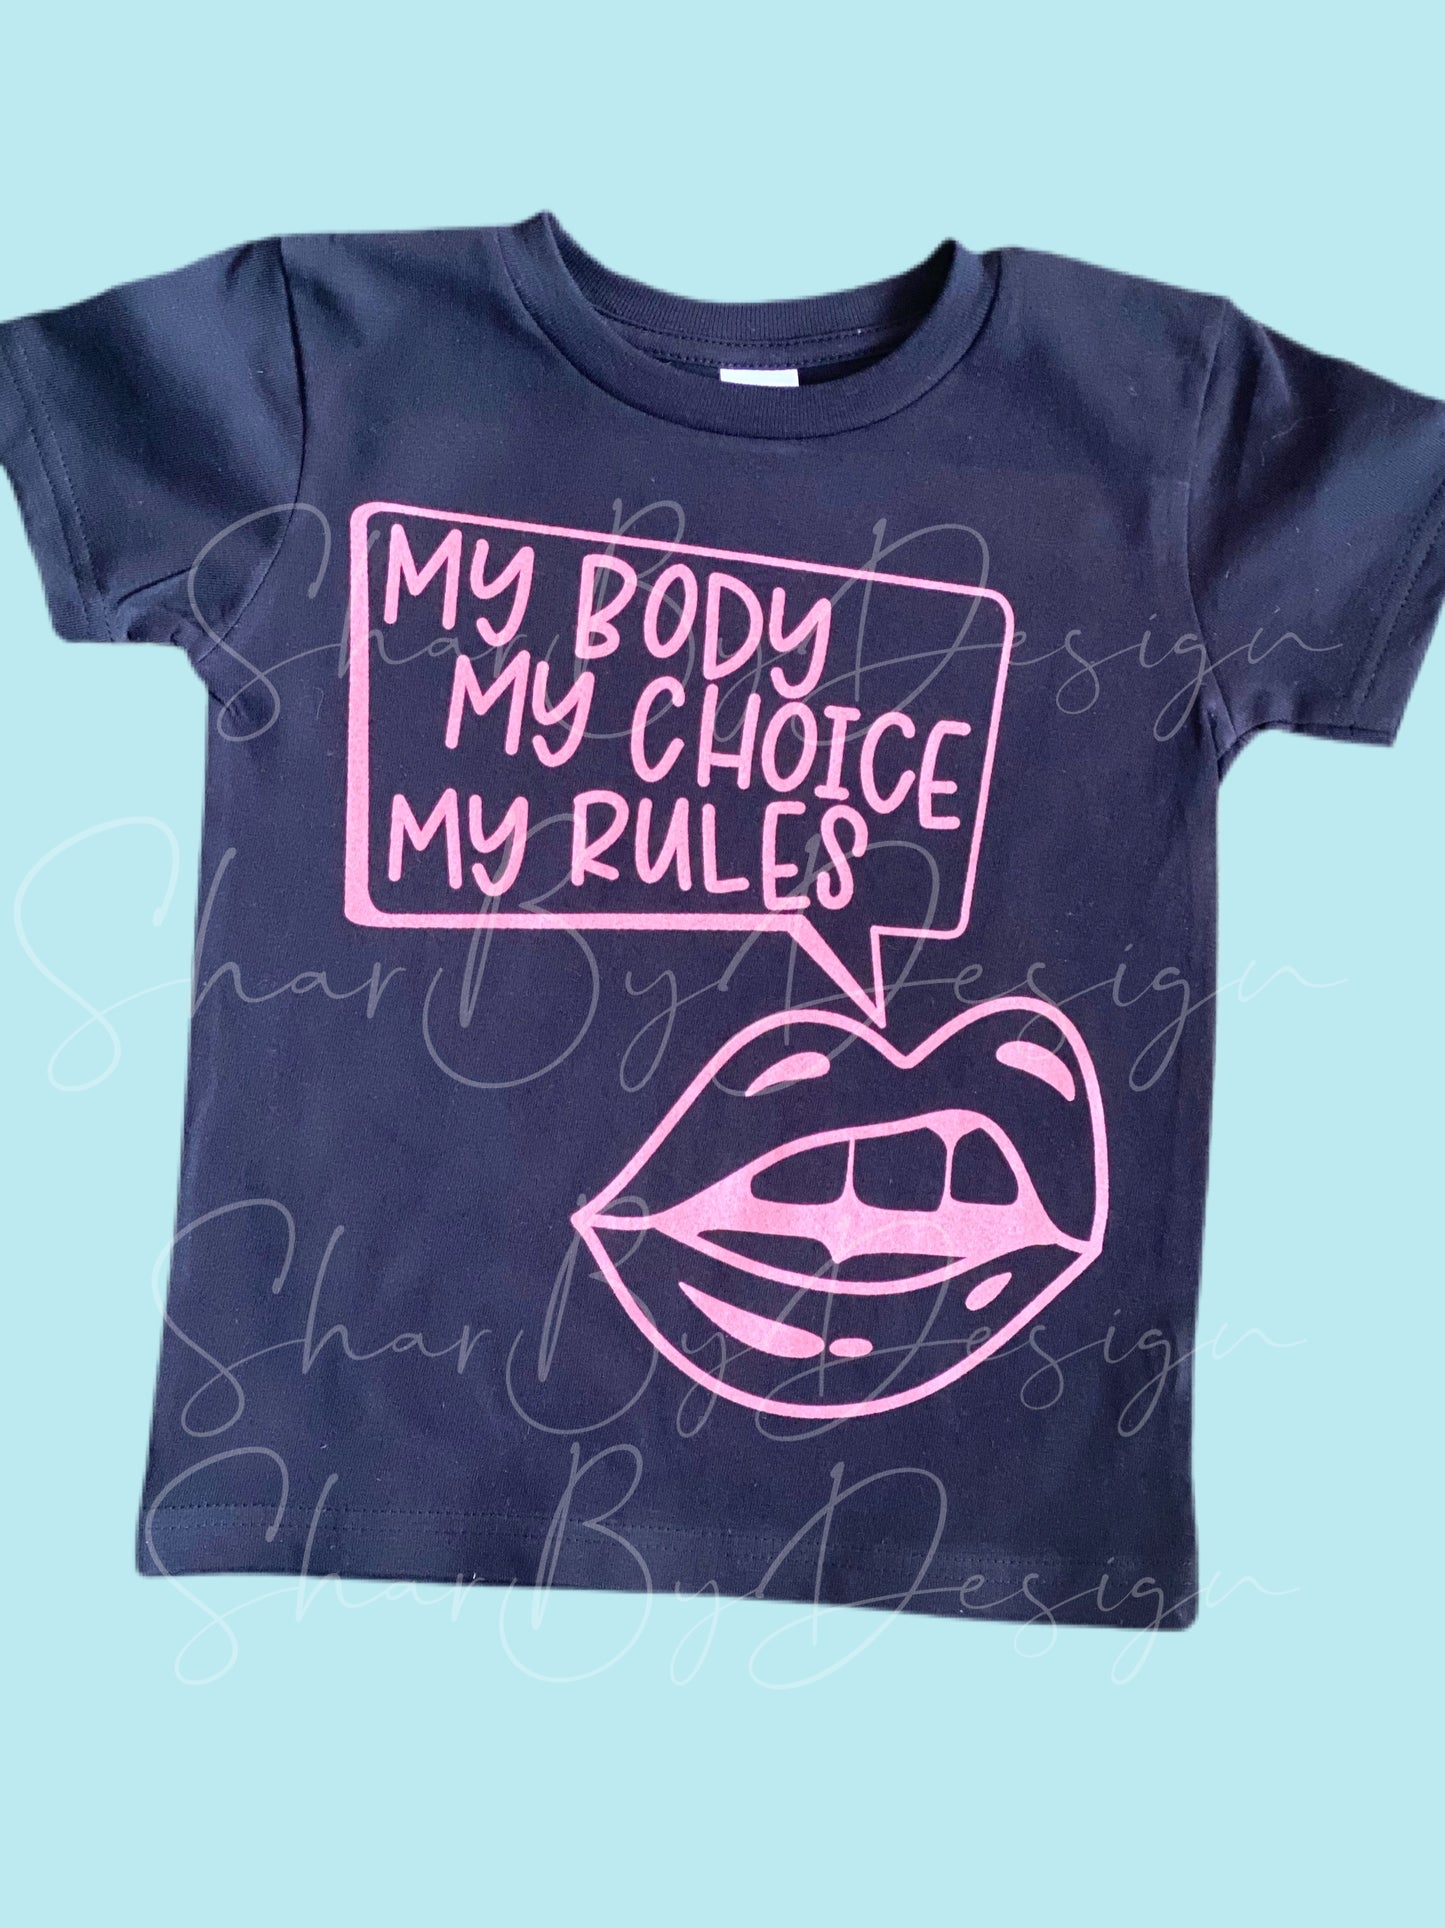 My body My choice (adult&youth)